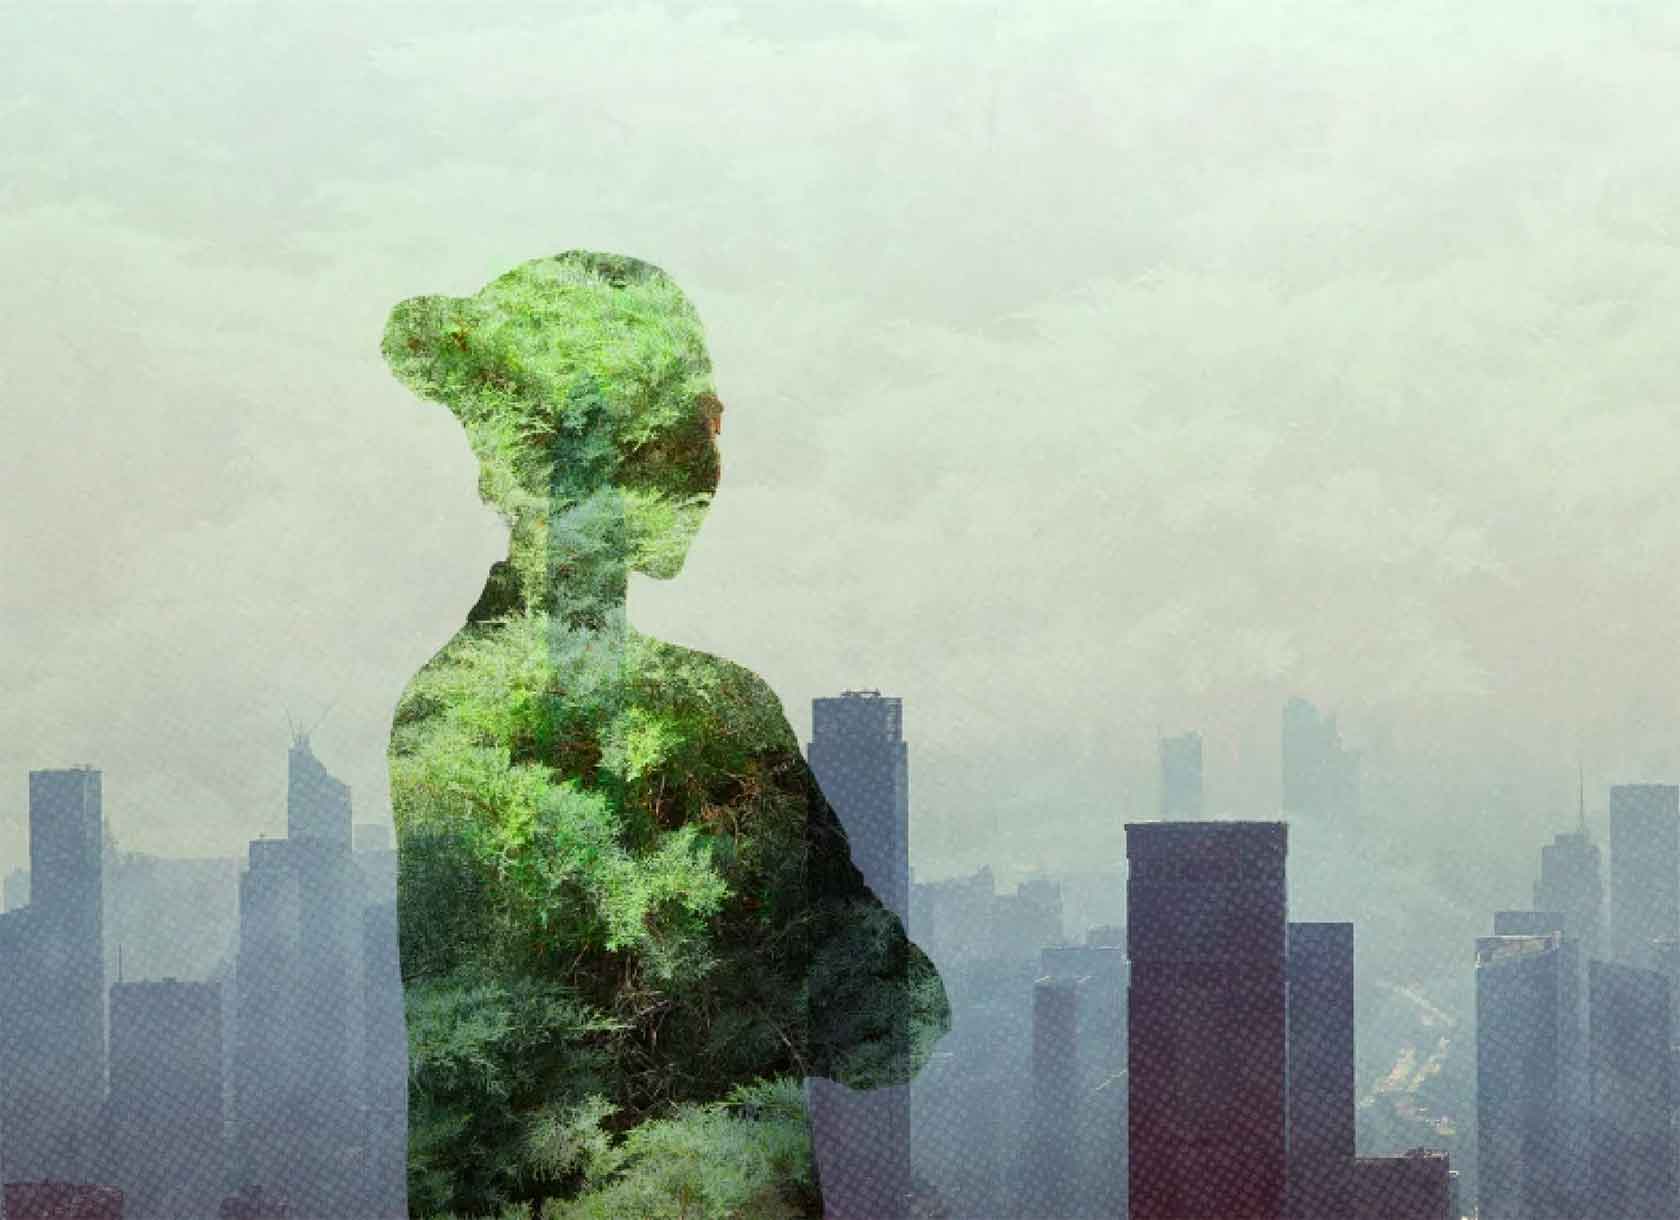 Double-exposure image of silhouette imposed over a forest and a city skyline